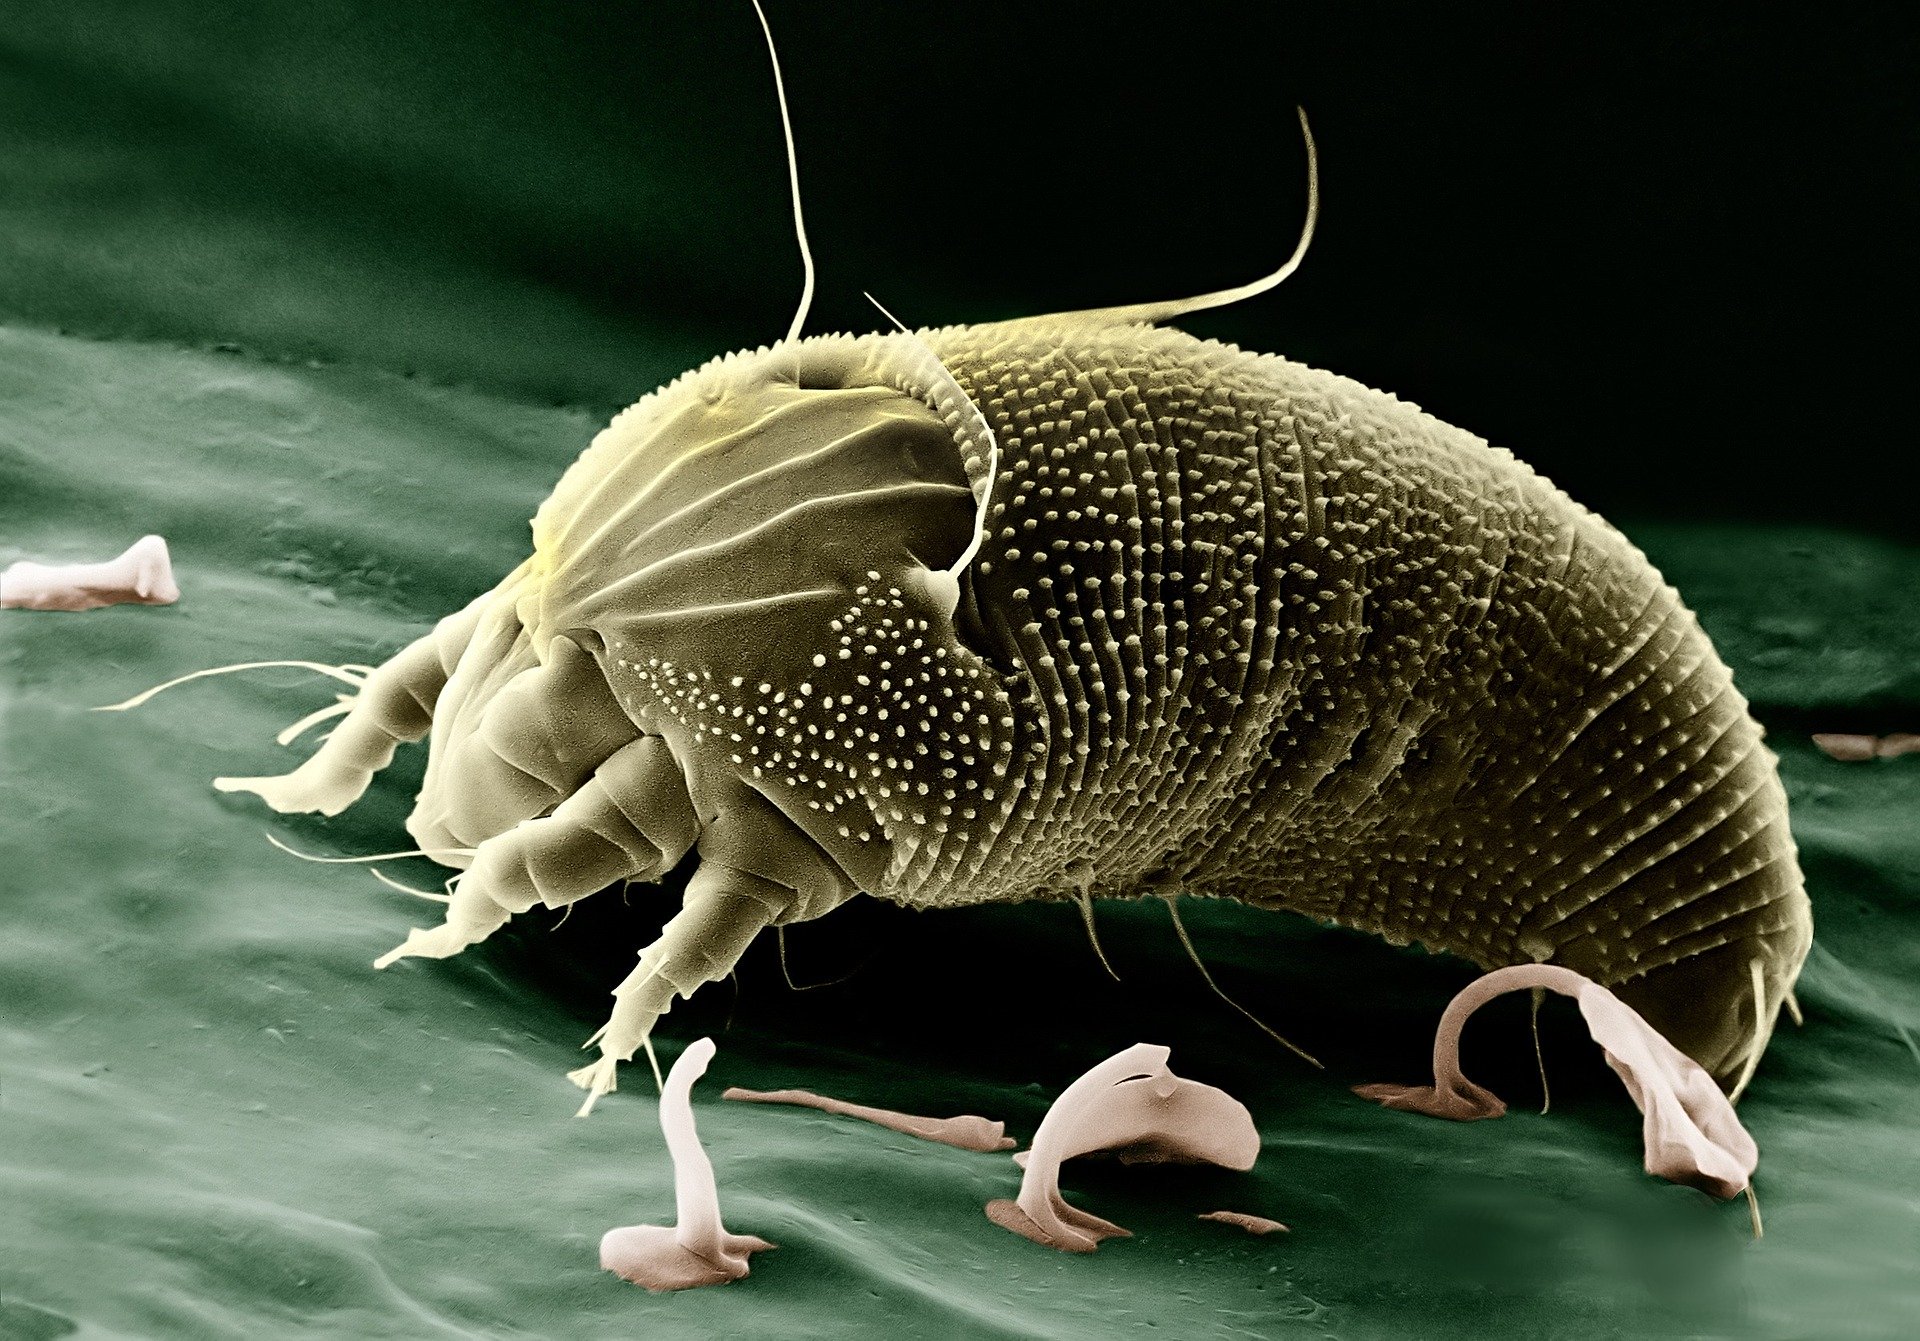 Mites in the hotel bed